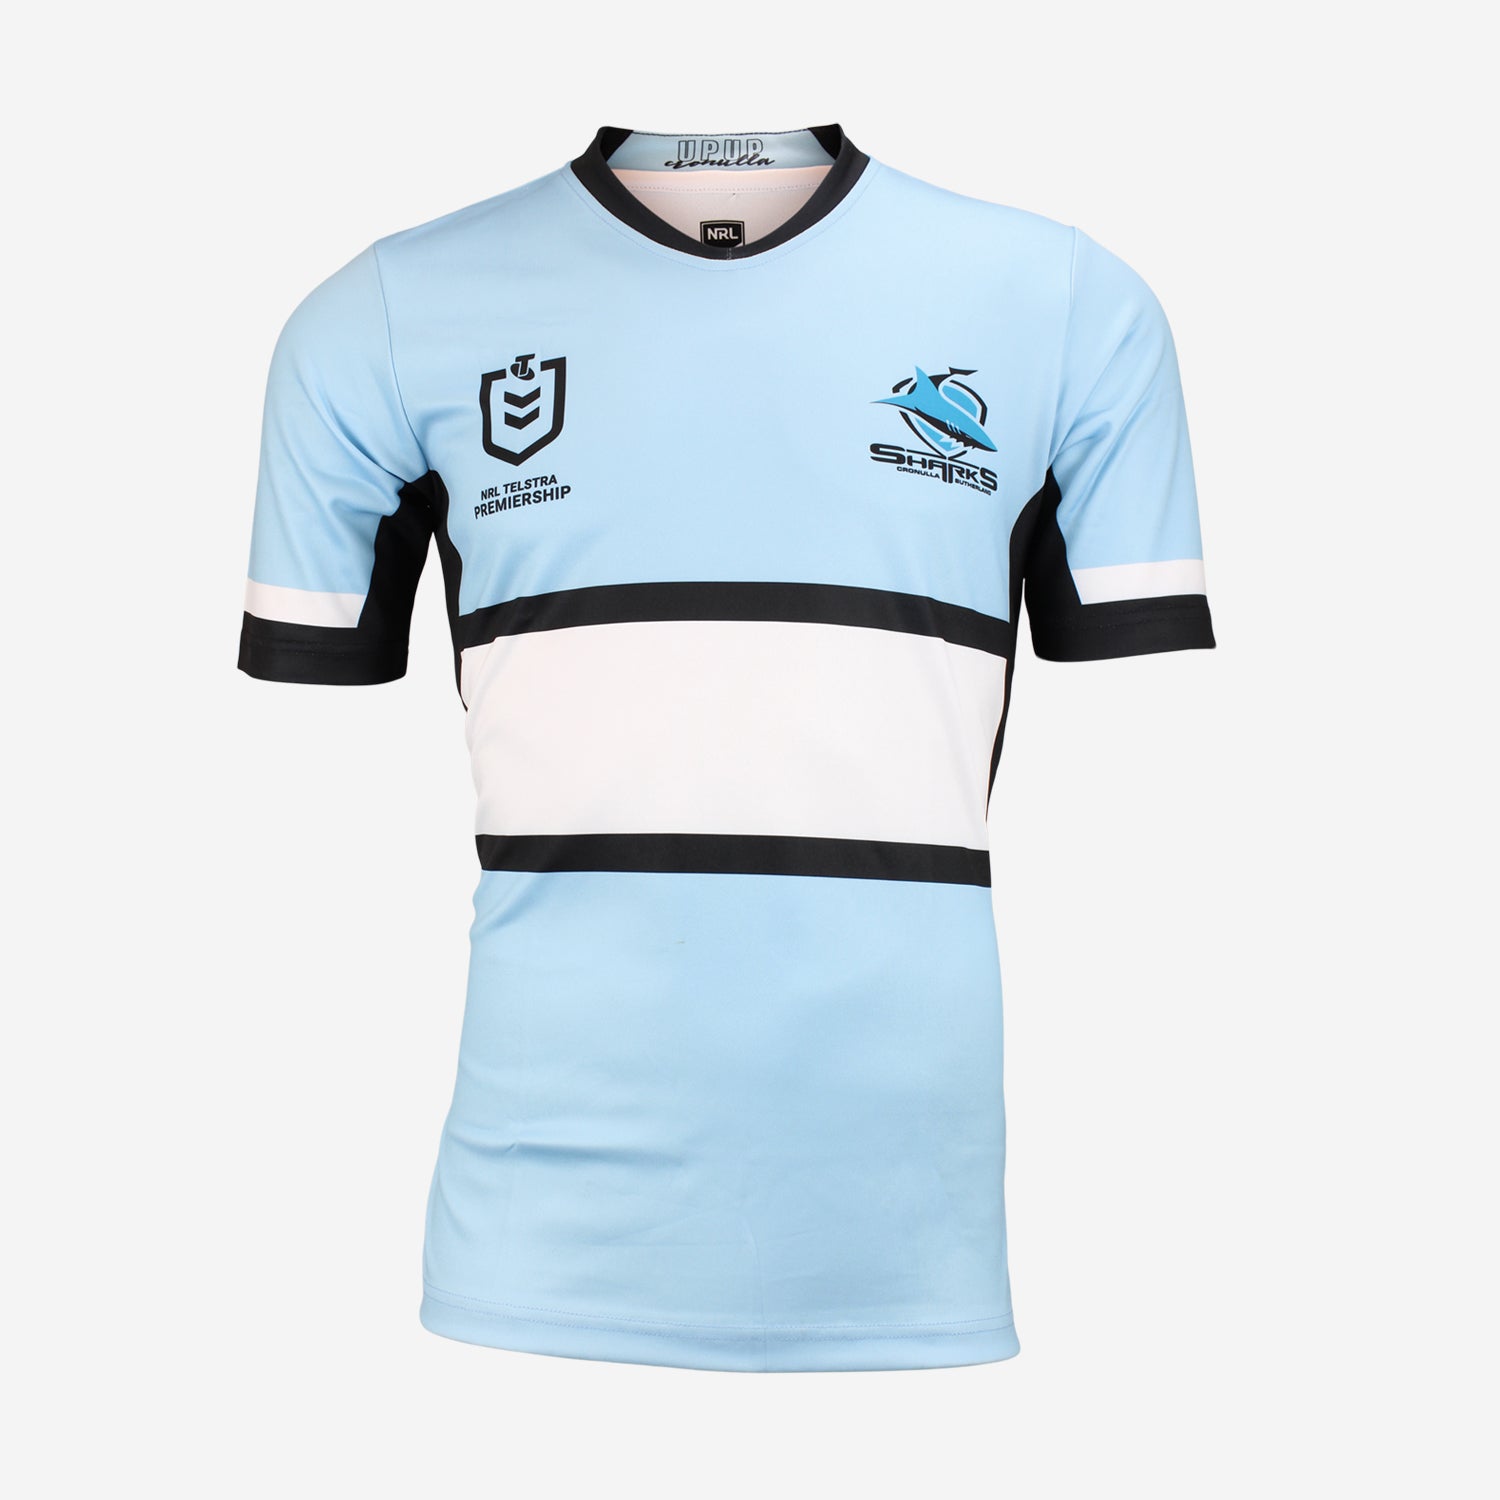 Blues Supporter Gear Online  Stirling Sports - Blues Rugby Home Replica  Jersey